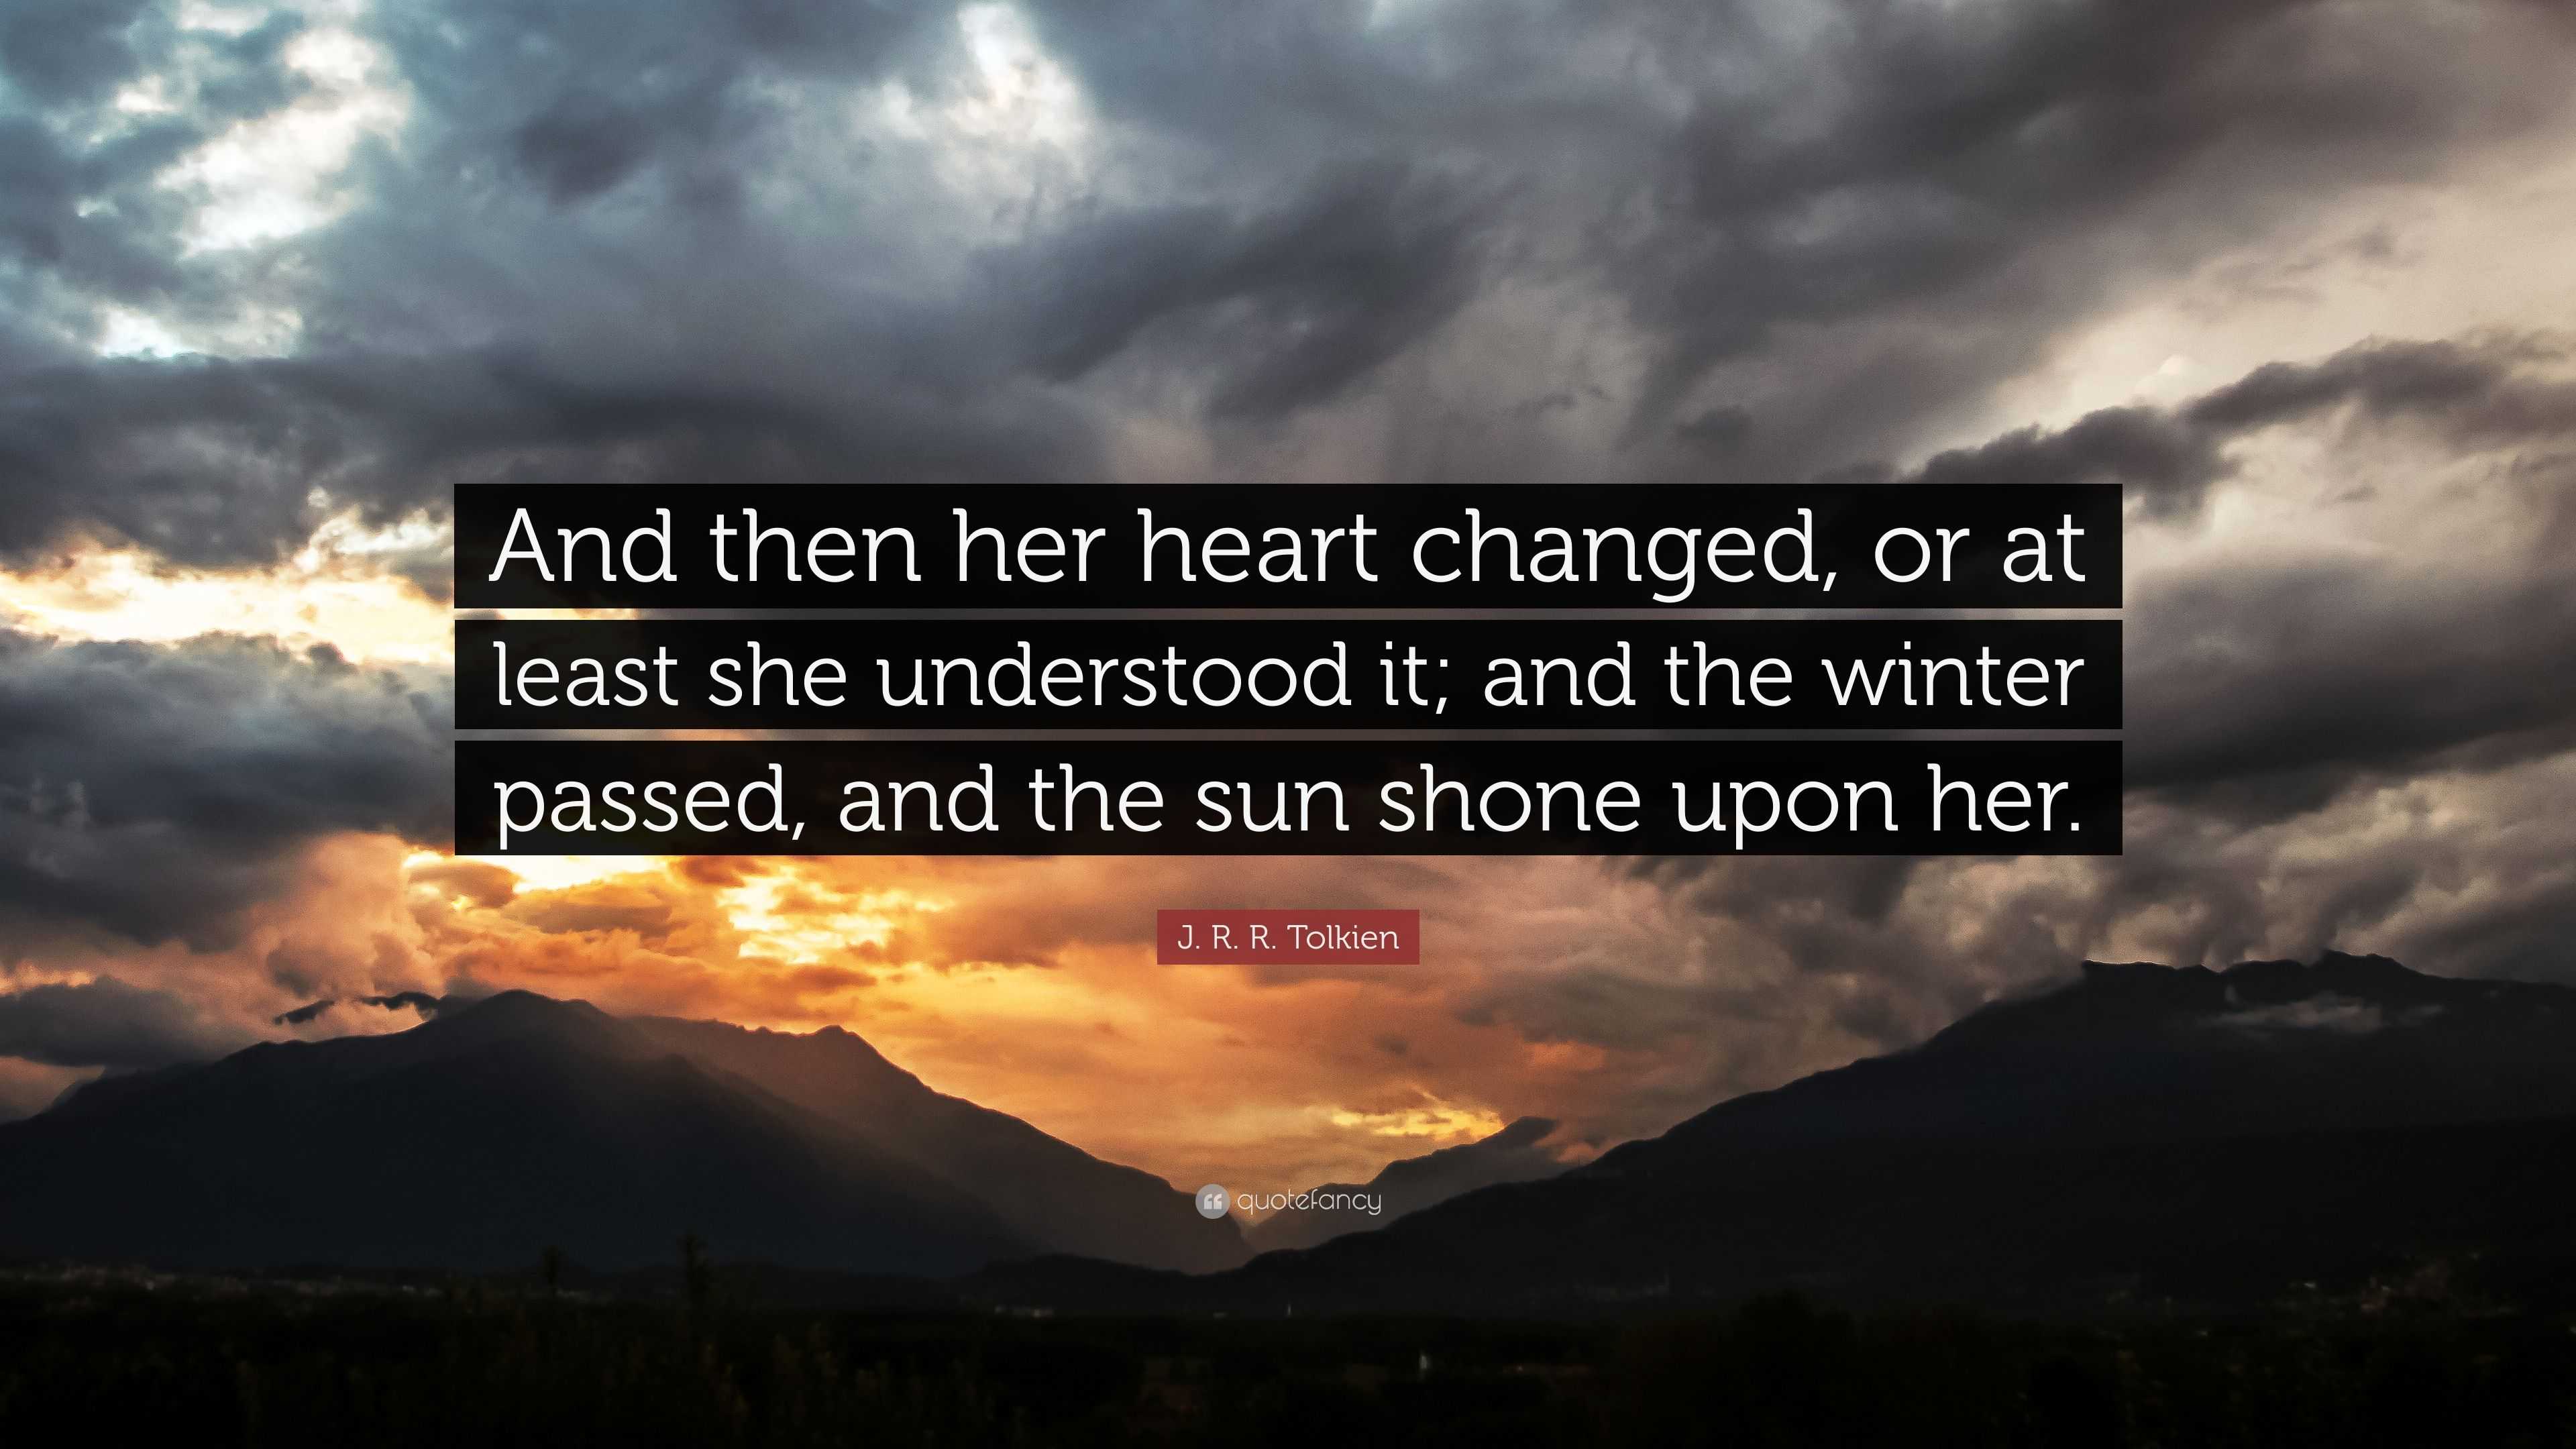 j-r-r-tolkien-quote-and-then-her-heart-changed-or-at-least-she-understood-it-and-the